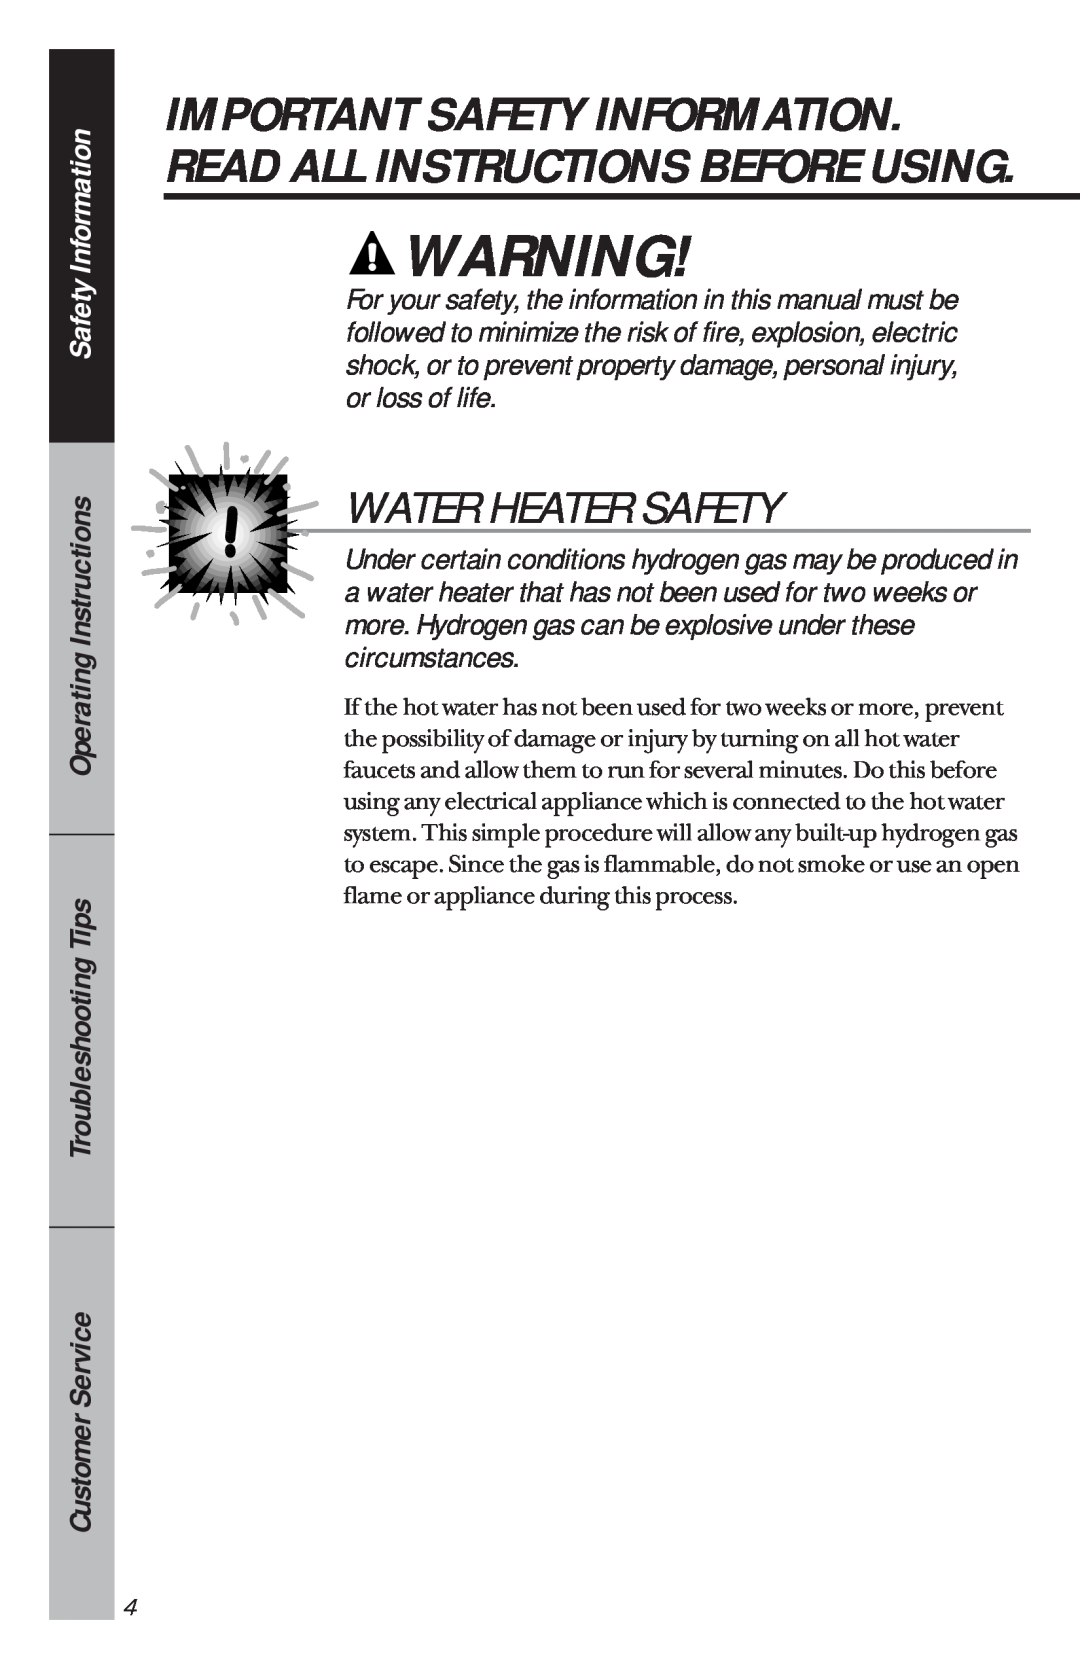 Hotpoint HDA100 Water Heater Safety, Safety Information, Operating Instructions Troubleshooting Tips, Customer Service 